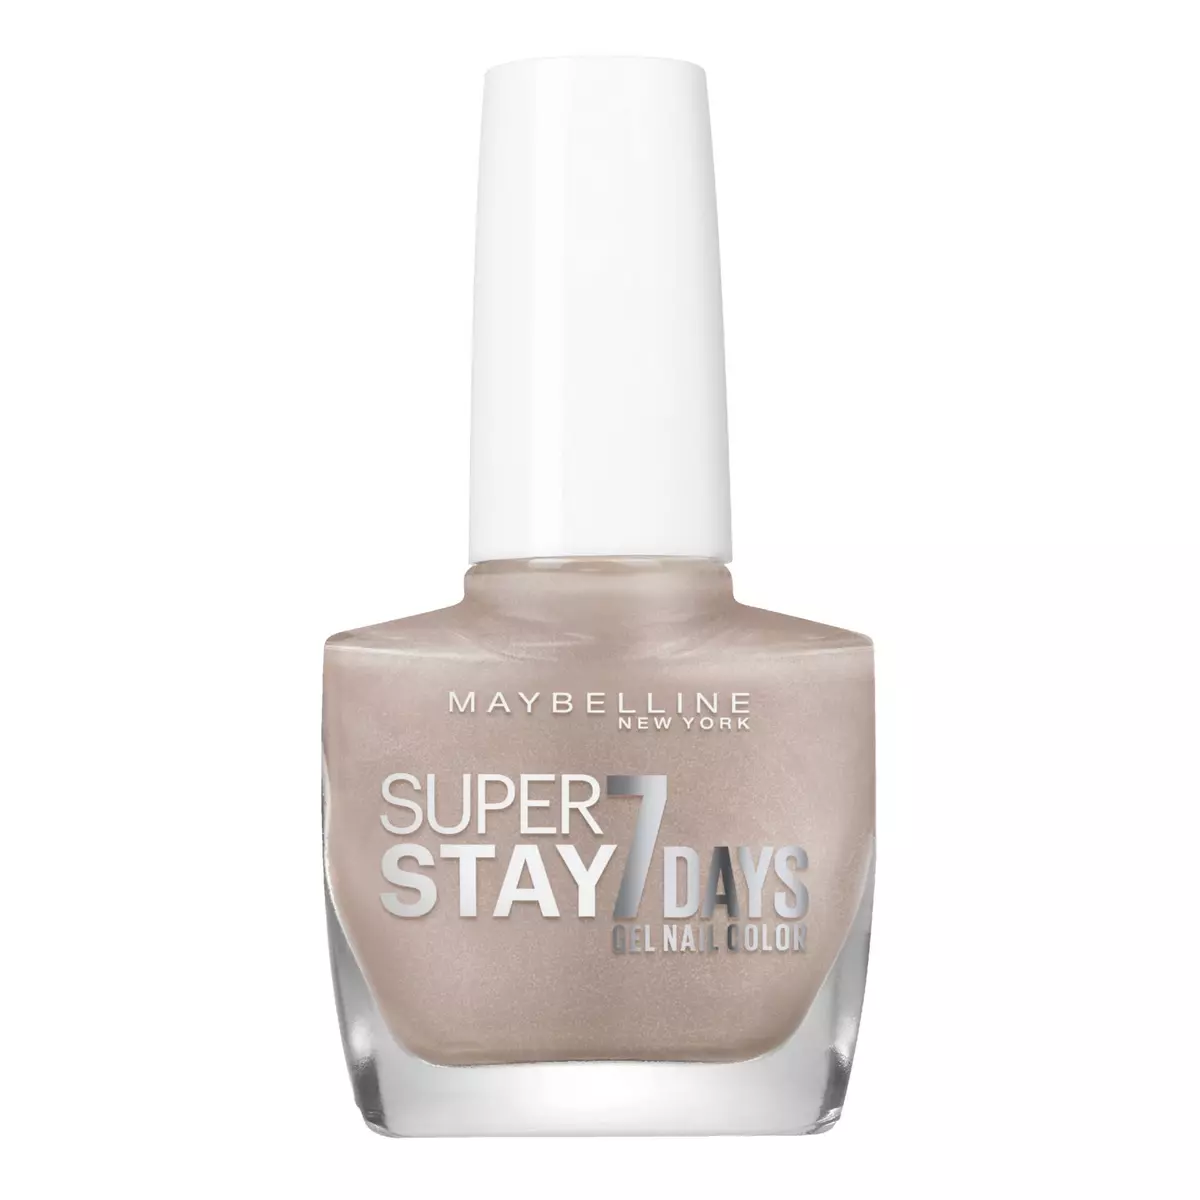 MAYBELLINE Super stay vernis à ongles 19 brun immuable 10ml